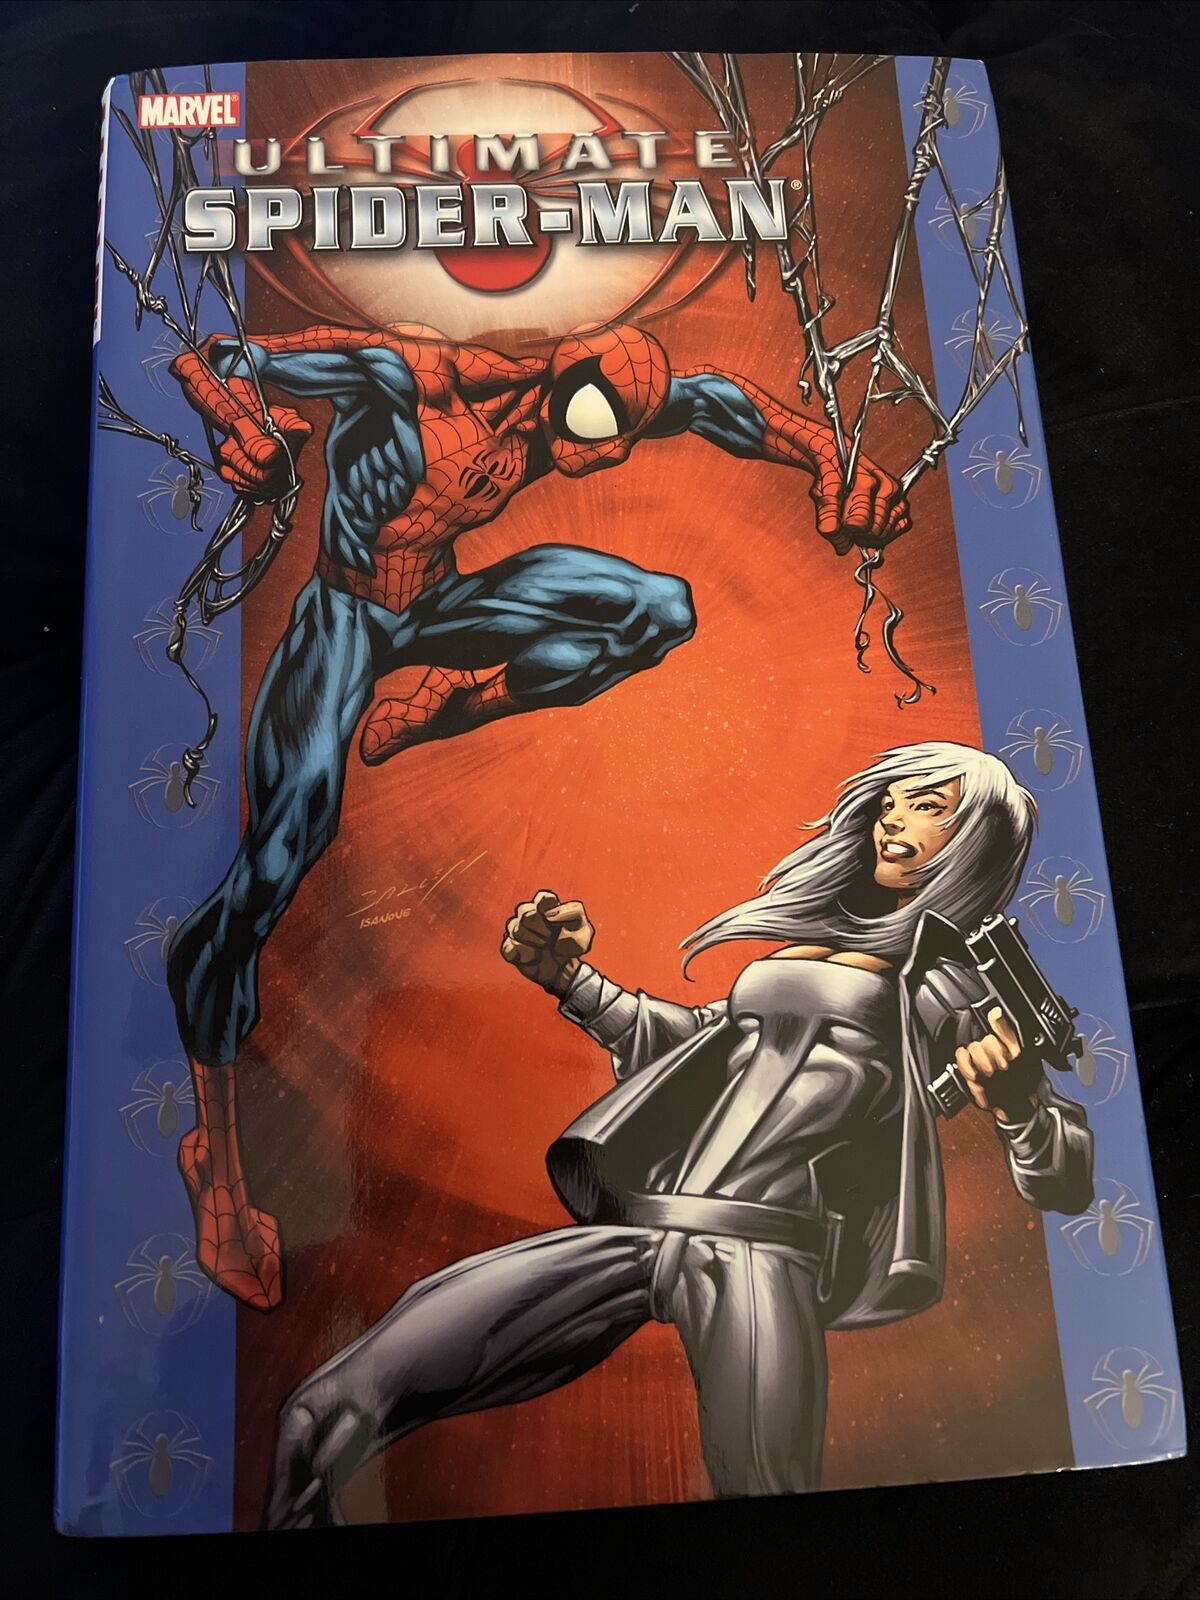 Ultimate Spider-Man Volume 8 by Brian Michael Bendis (2007, Hardcover)